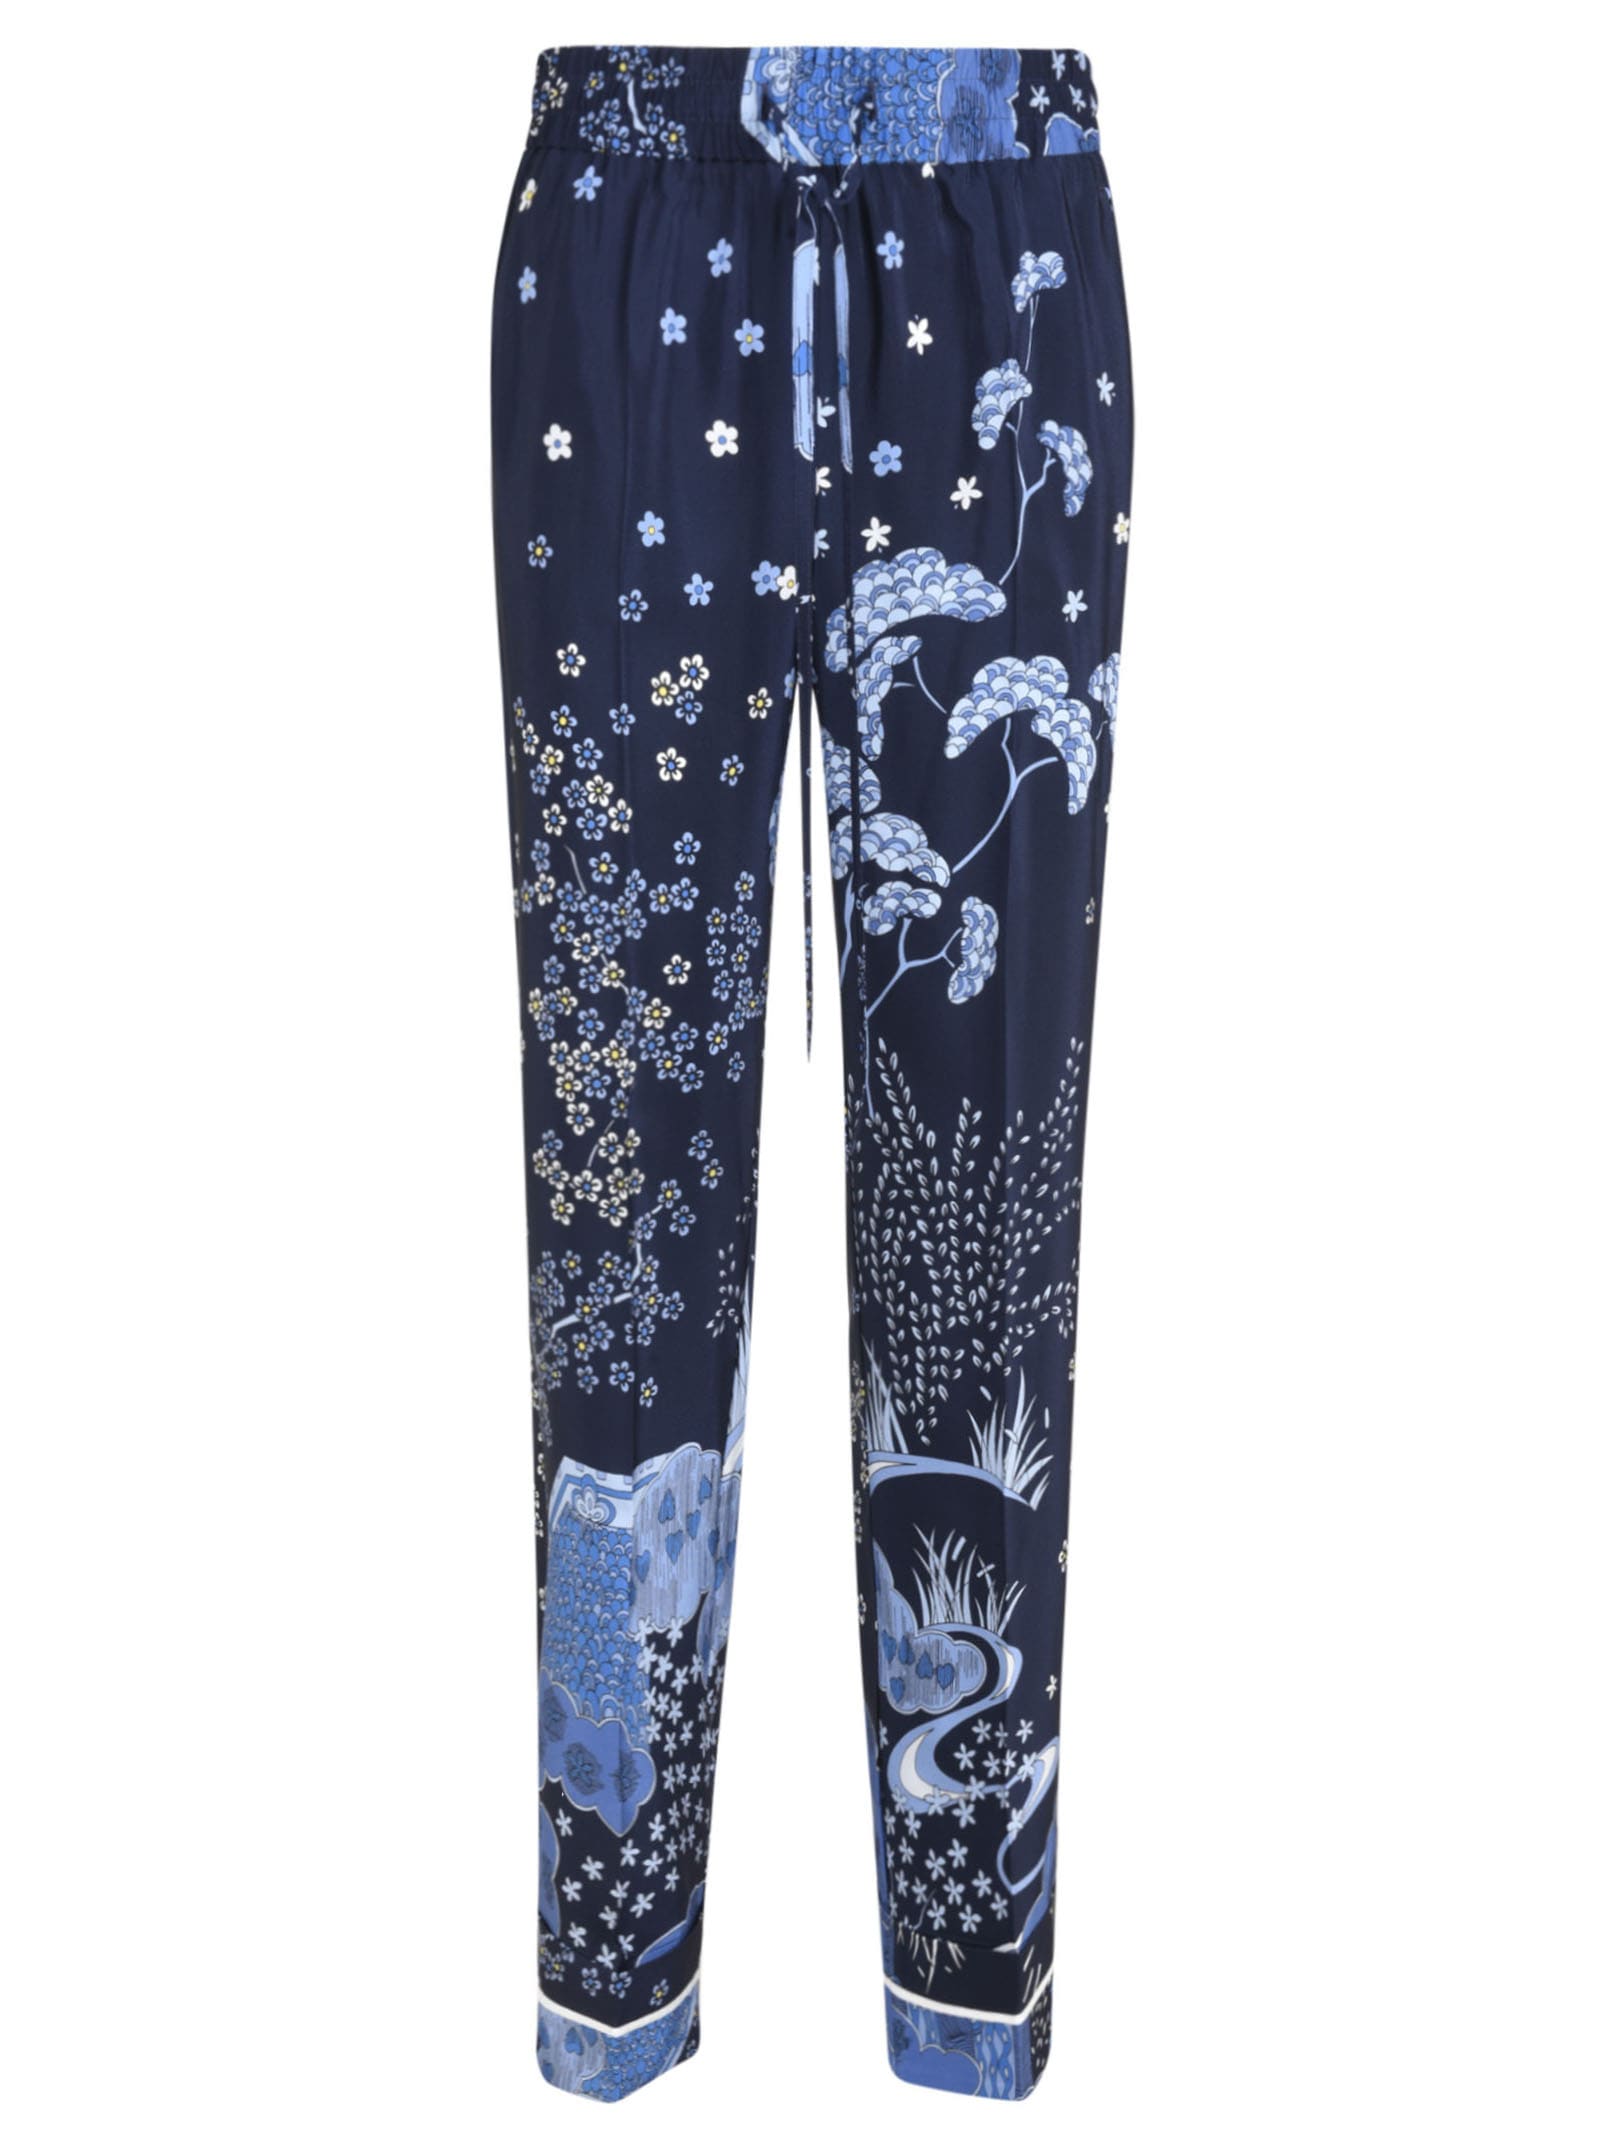 RED Valentino Floral Printed Trousers